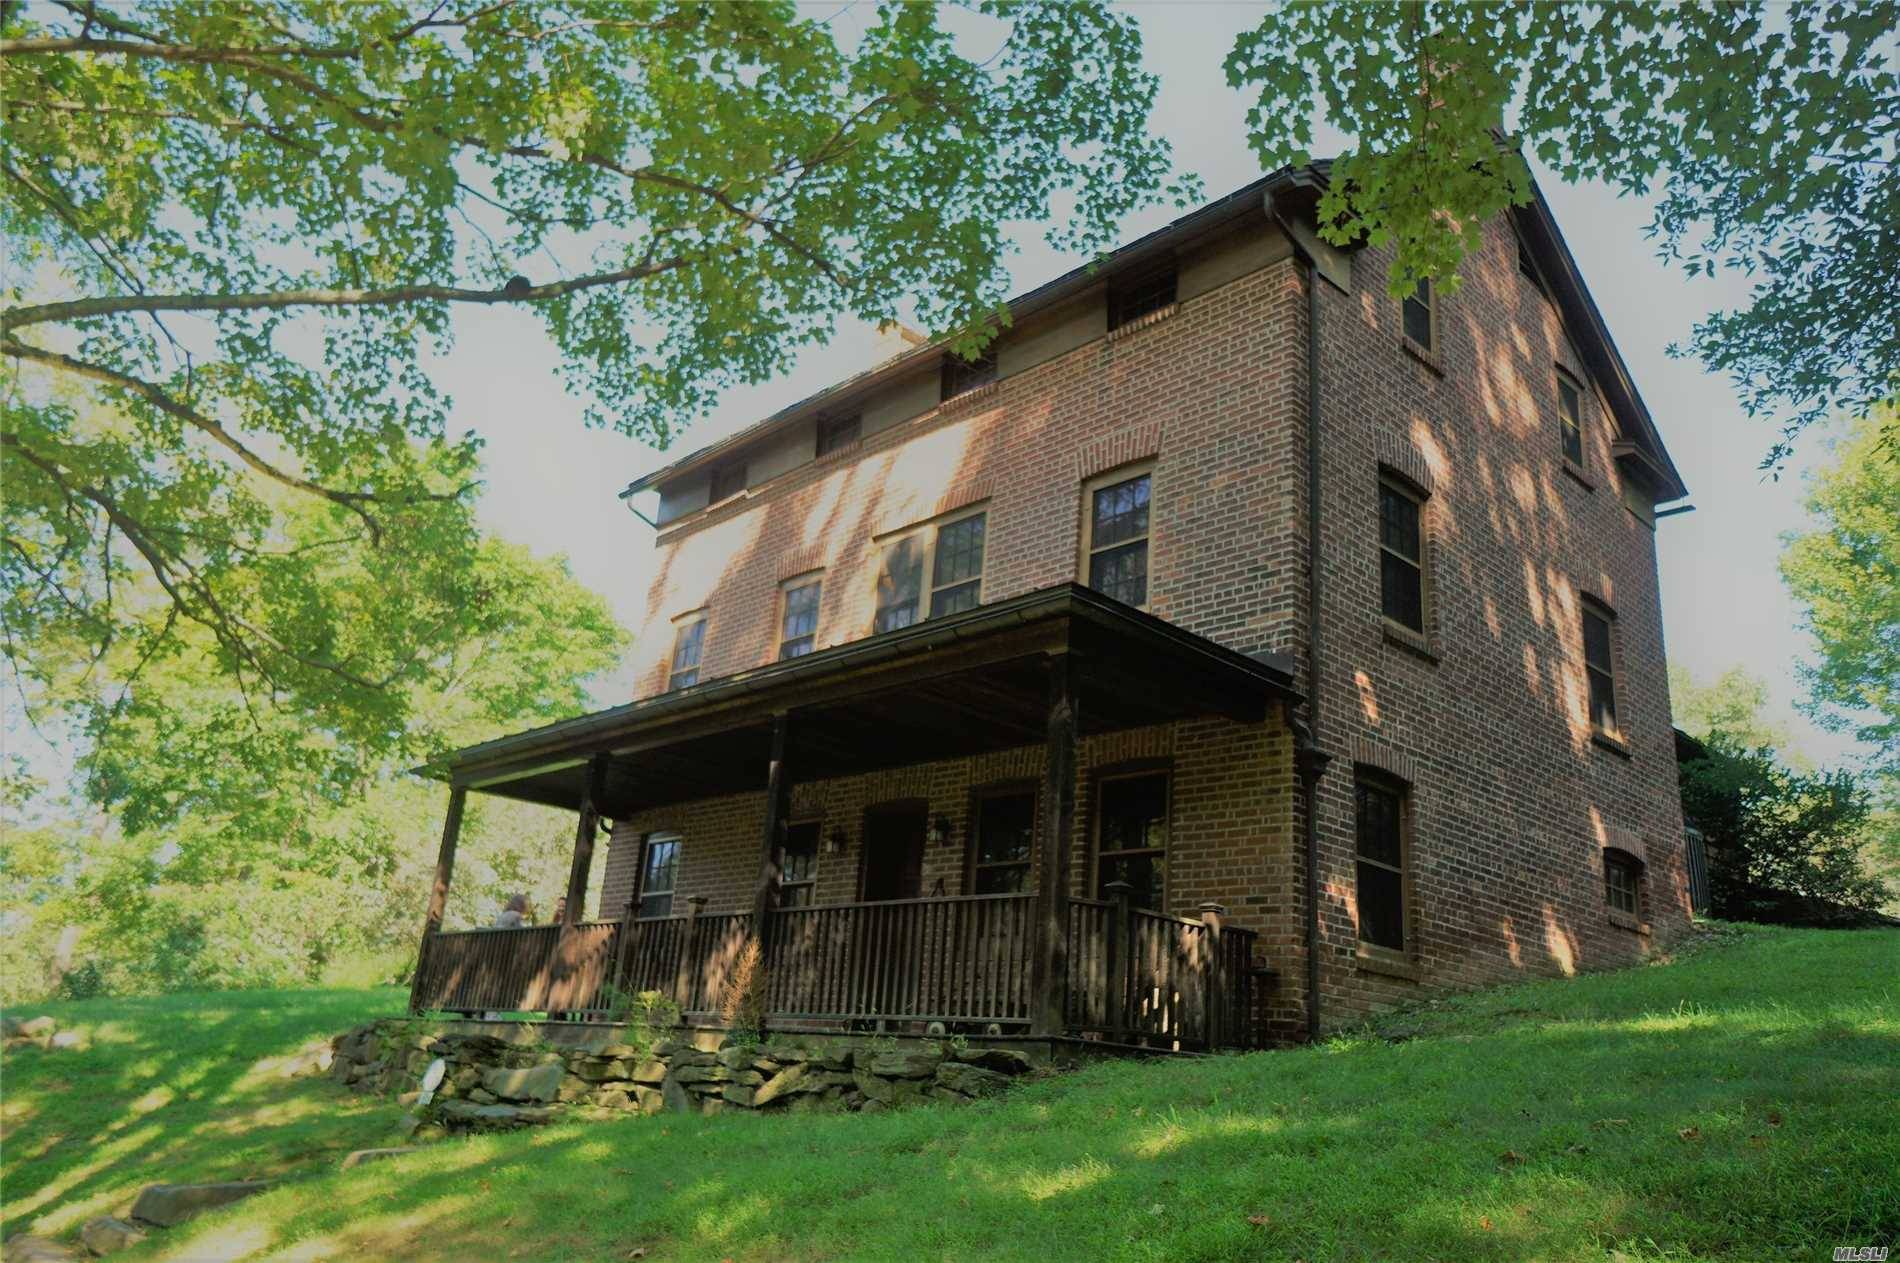 Restored 1 Family Brick And Cedar Home Features Cherry And Granite Kitchen W Professional Grade Appliances, Fireplace, Sunroom W Wainscot Style Ceiling, Belgium Bluestone.